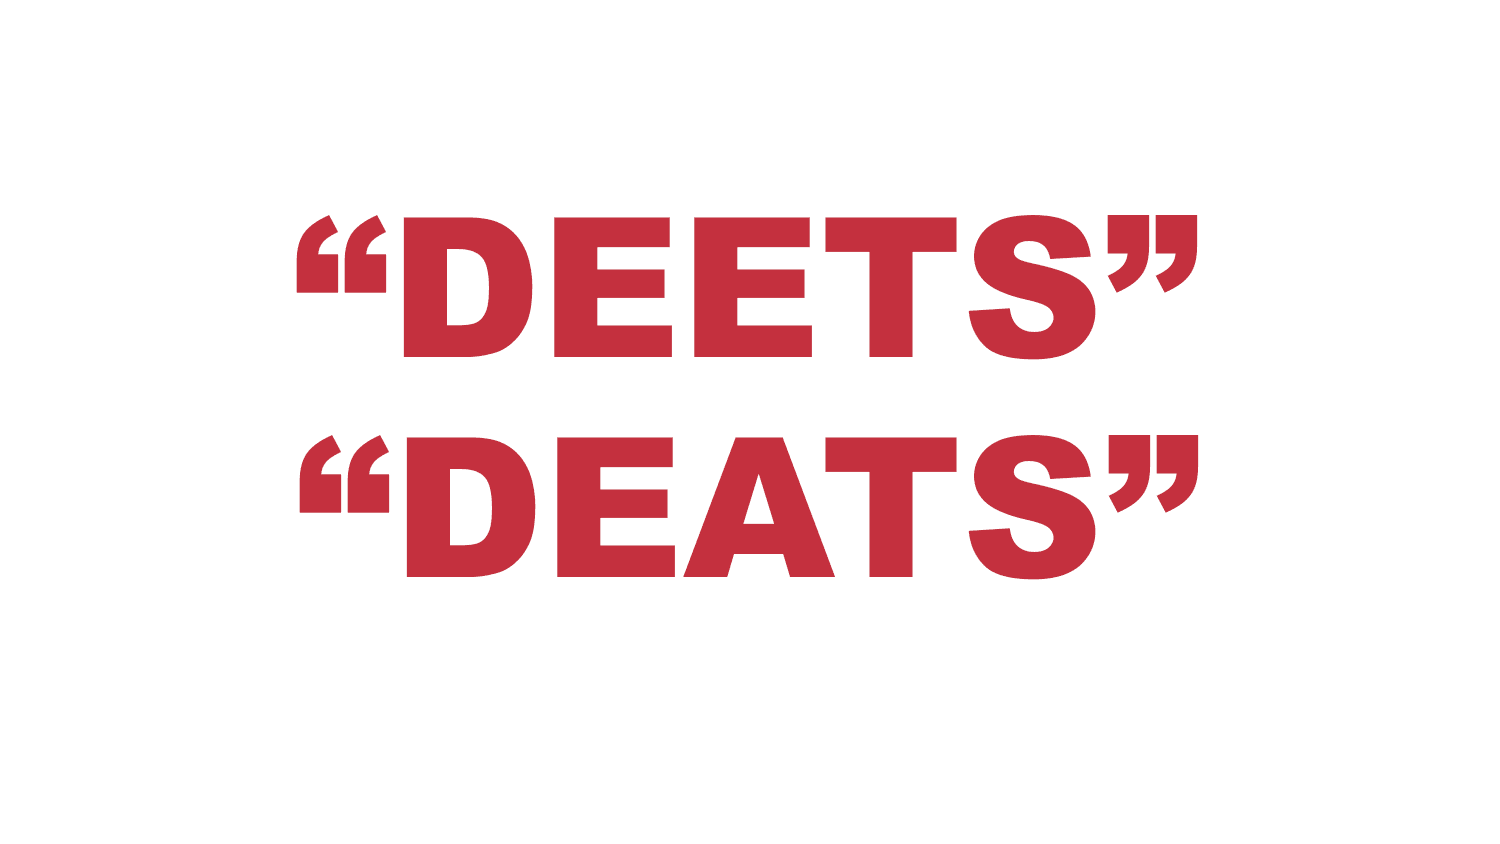 What does "Deets" or "Deats" mean?